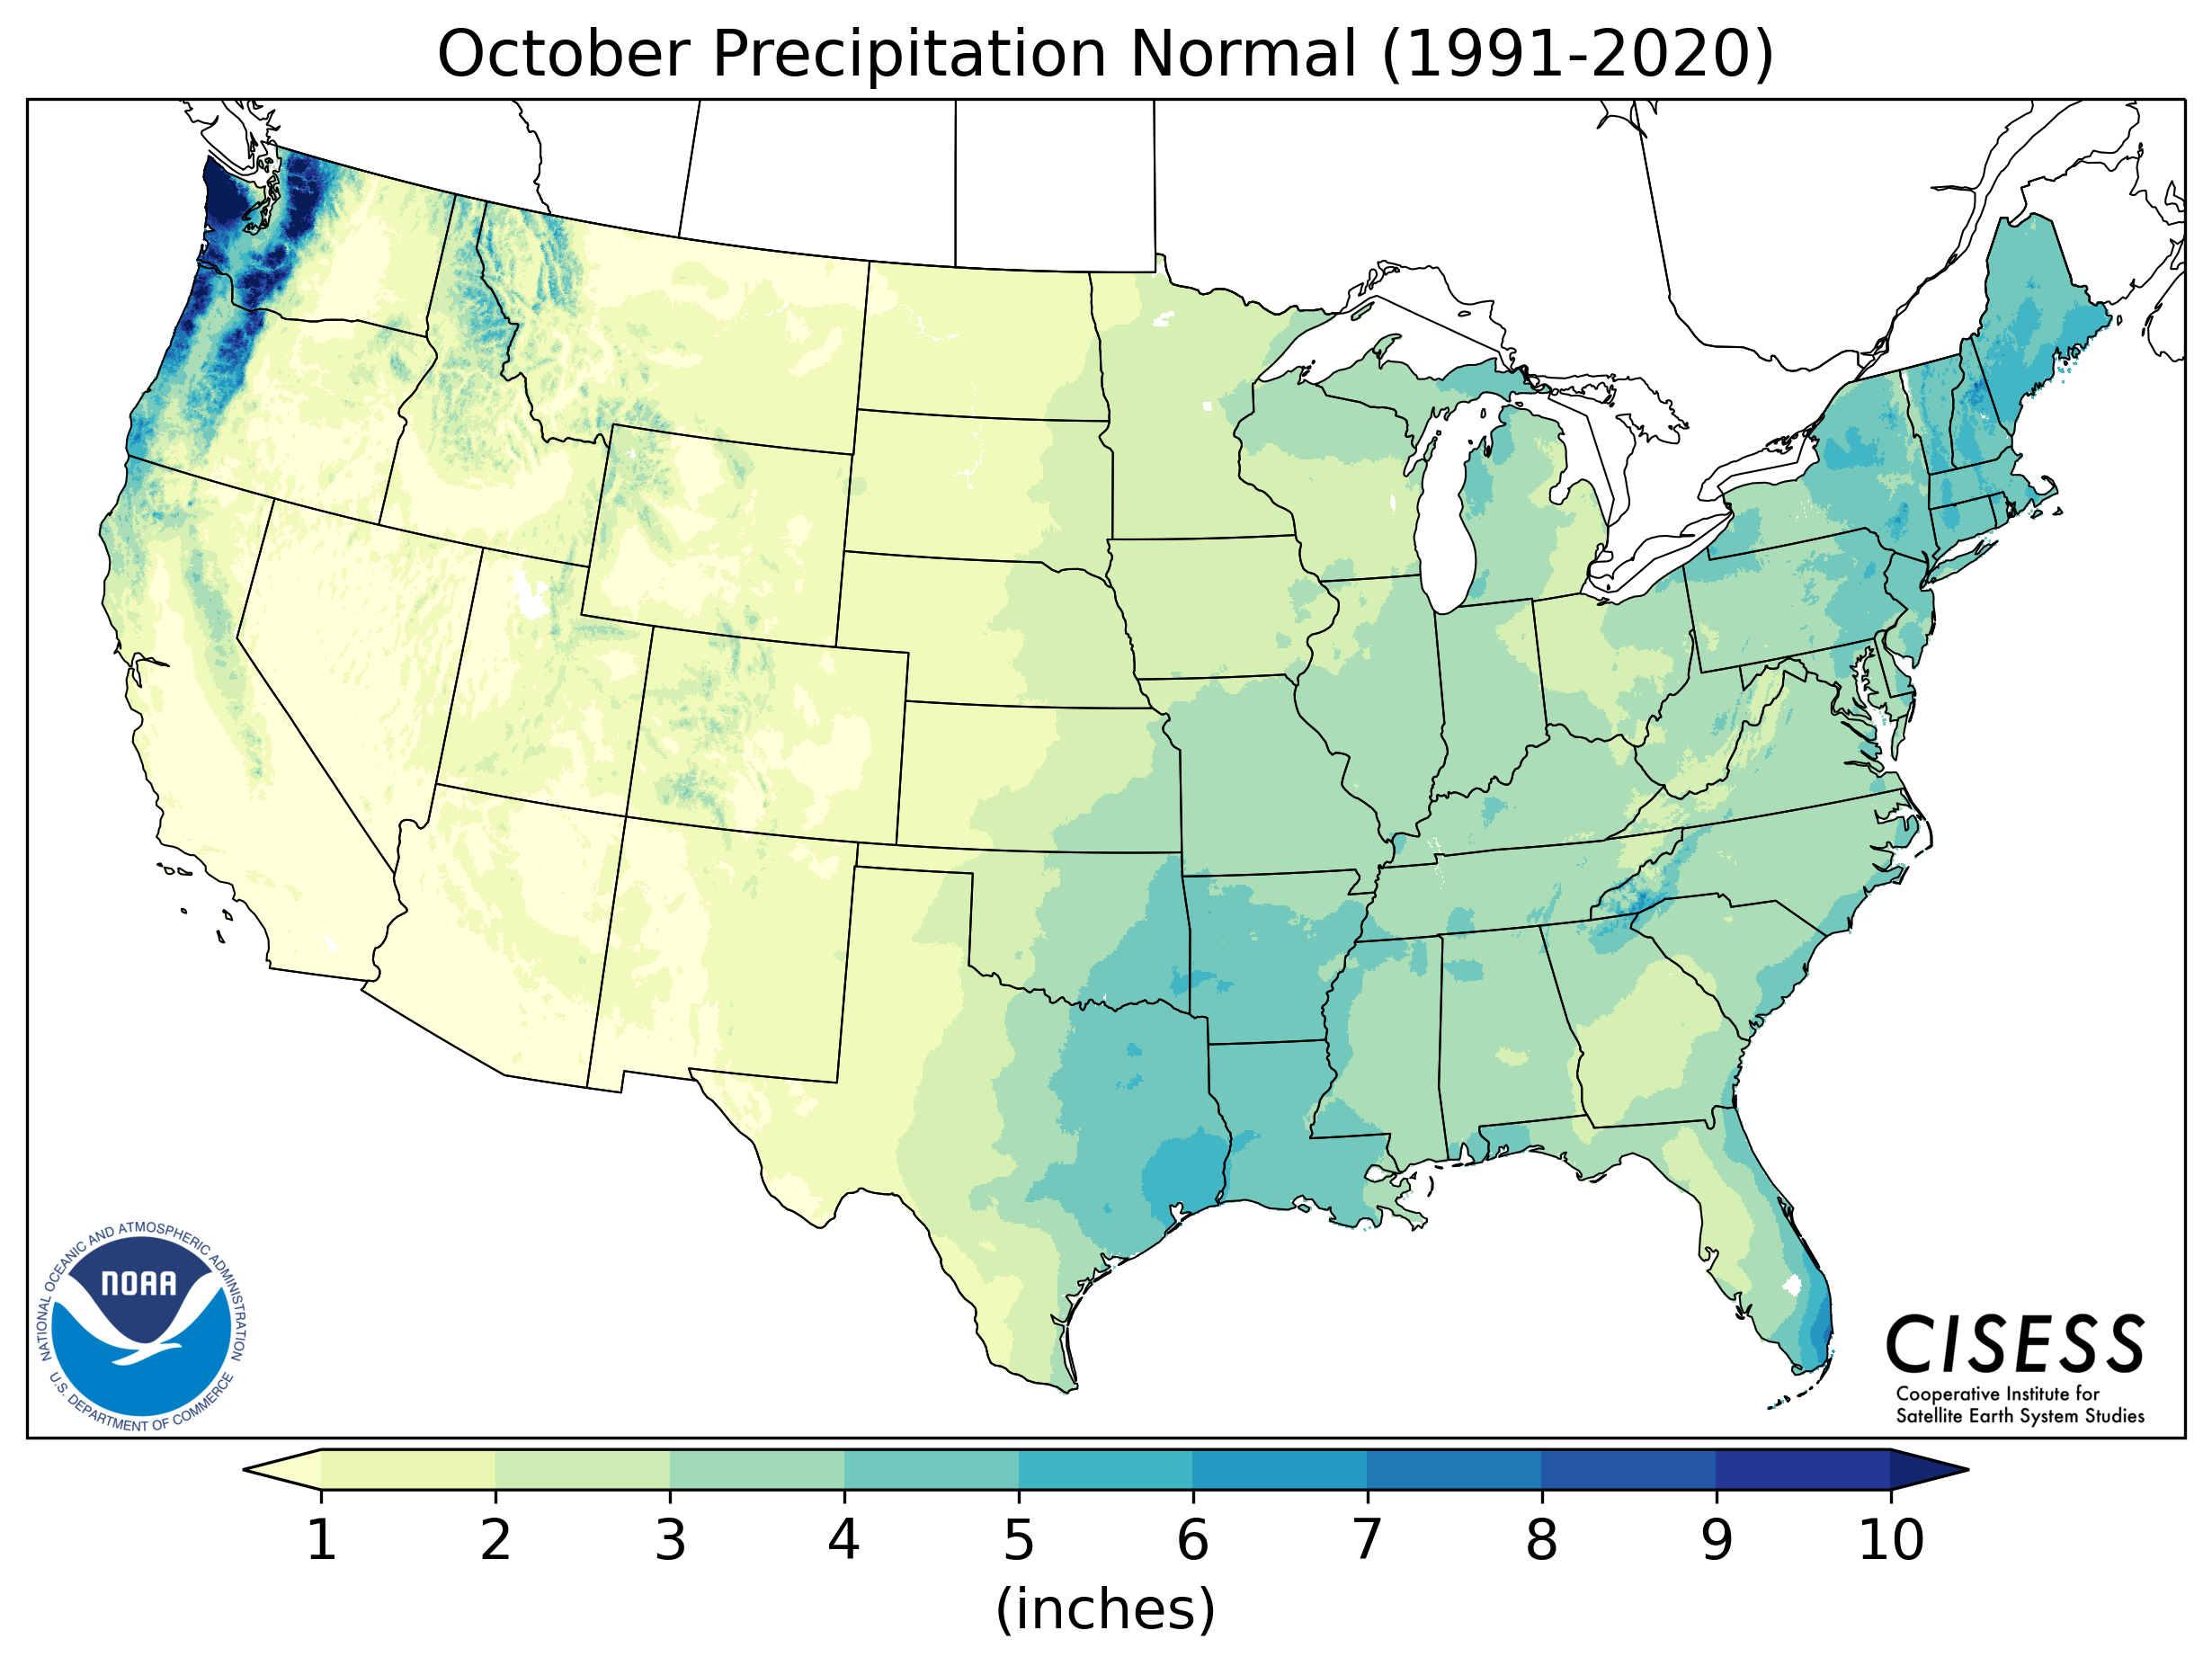 Map of the contiguous United States displaying October precipitation normals from 1991 to 2020 as a range from 1 inch to 10 inches in colored shades from light green to dark blue.